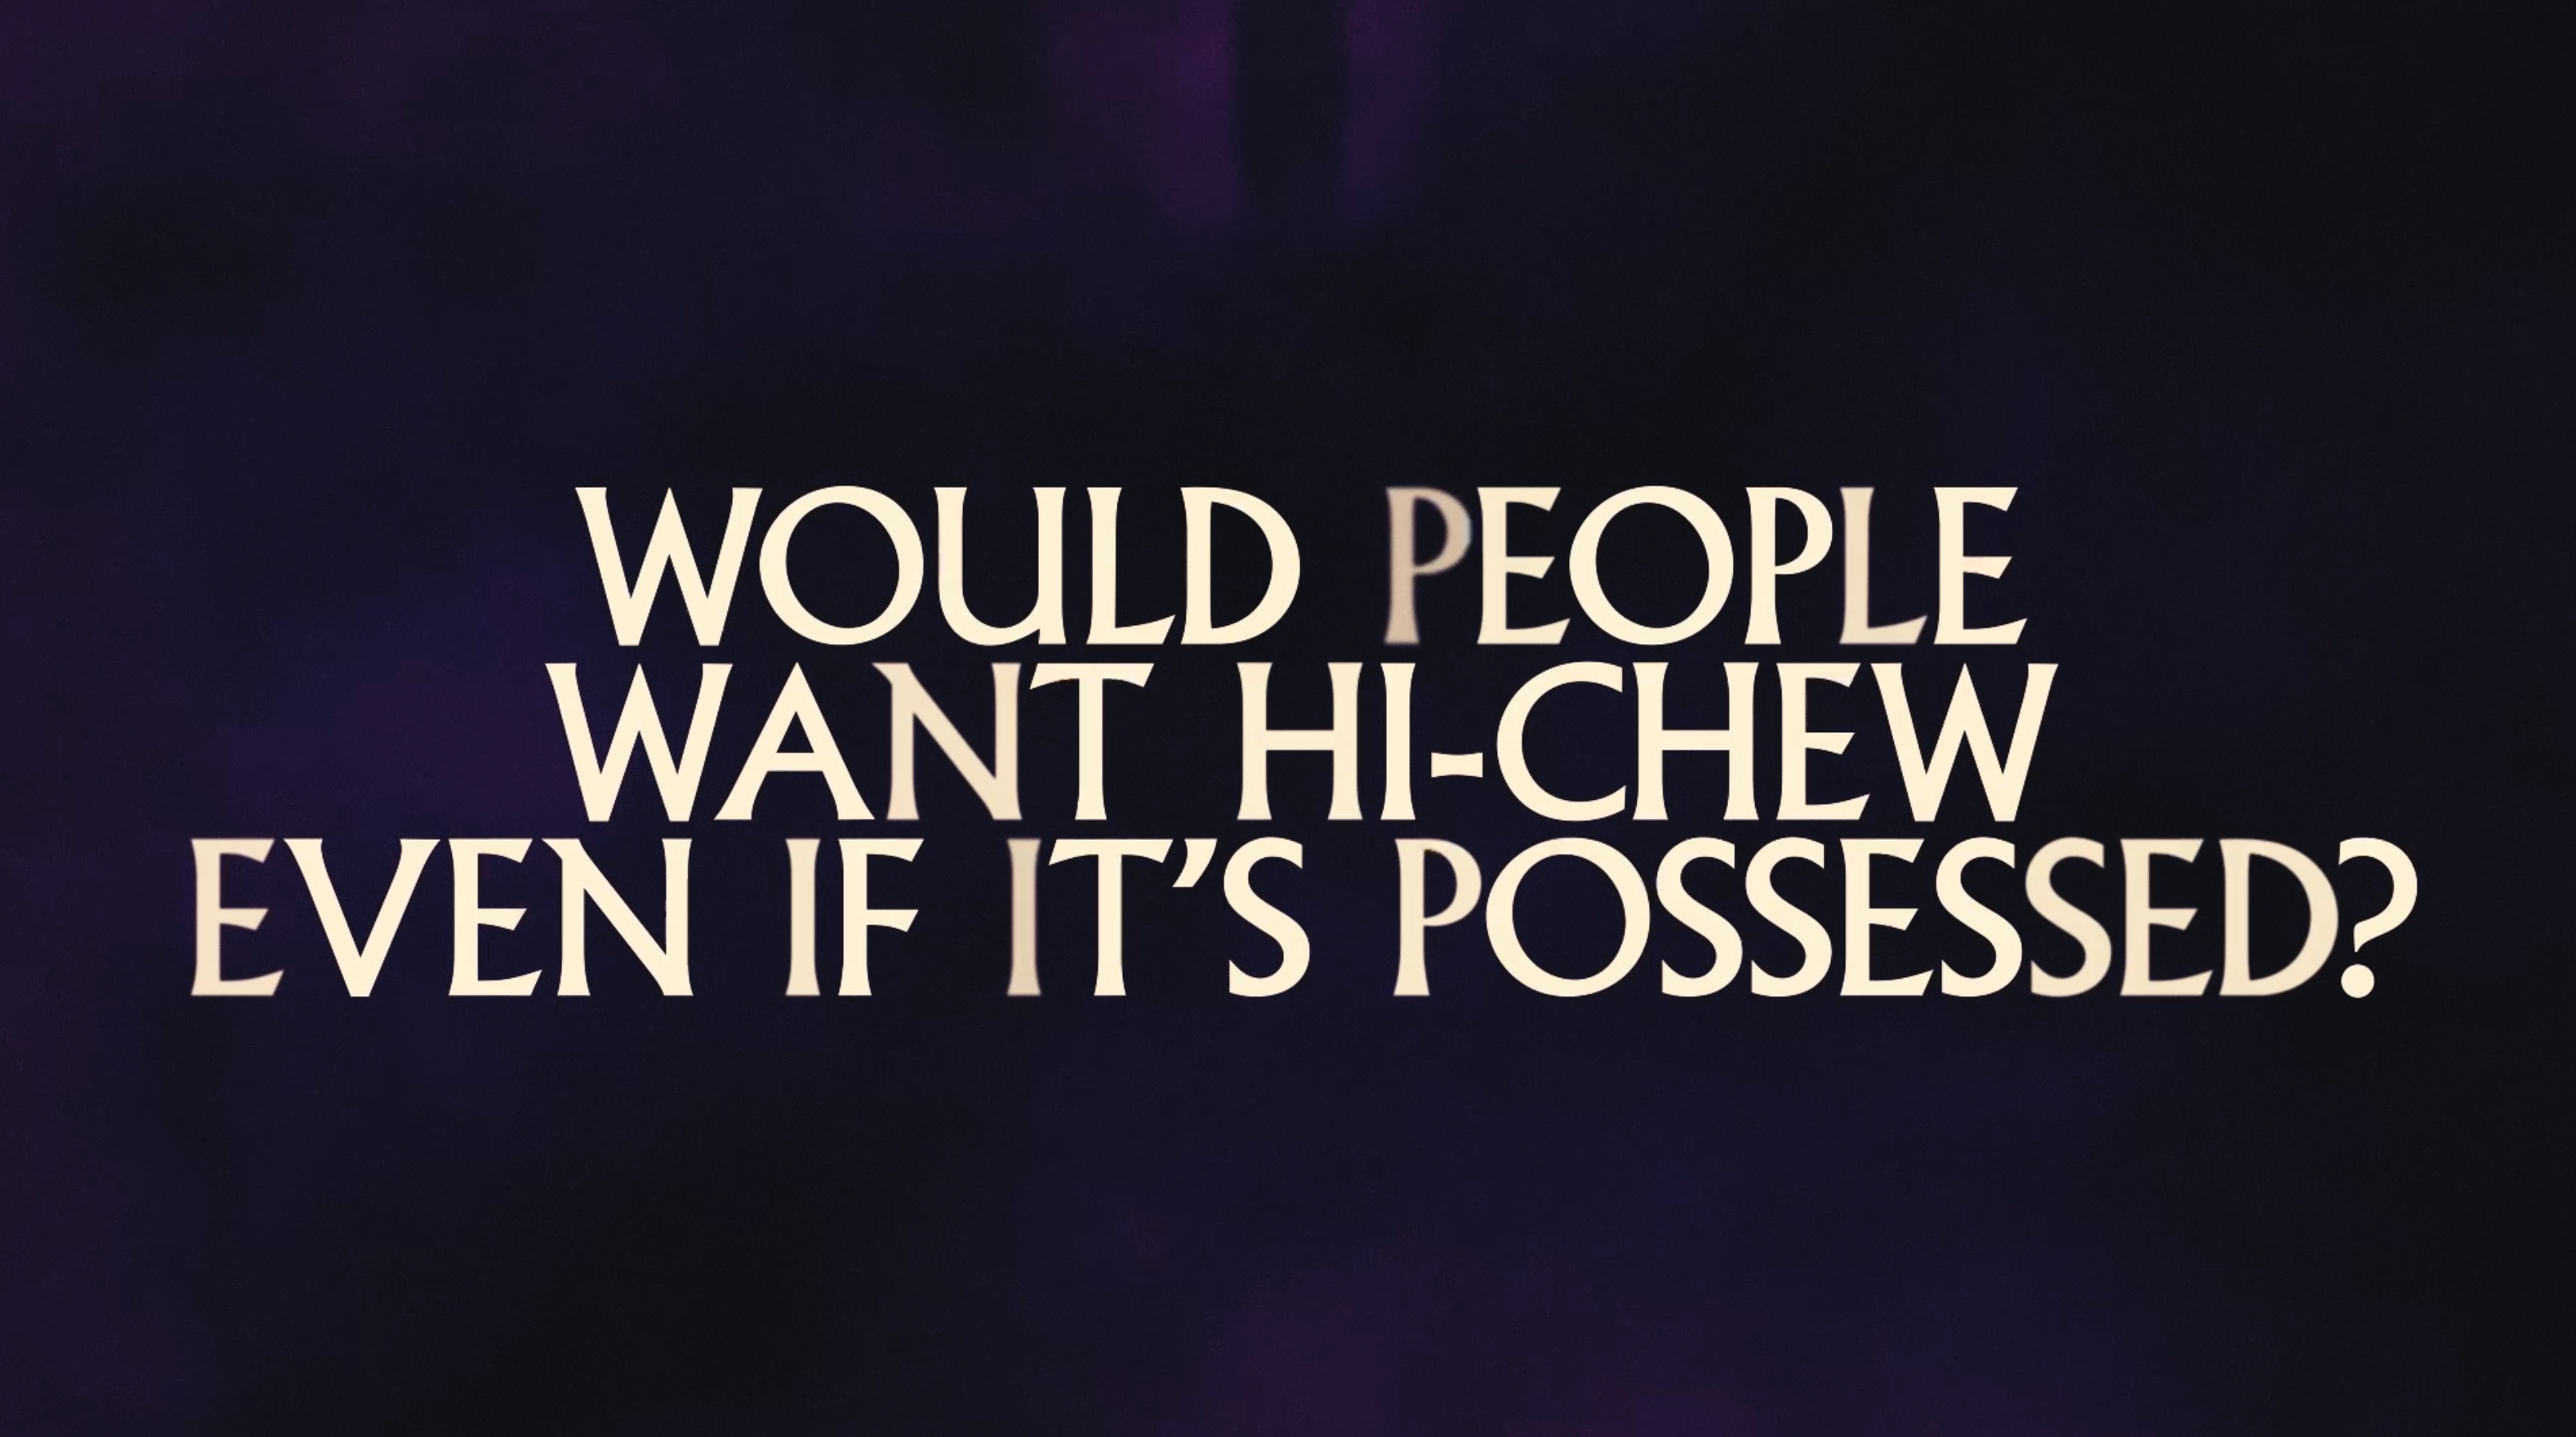 Would People Want HI-CHEW If It's Posessed? Card